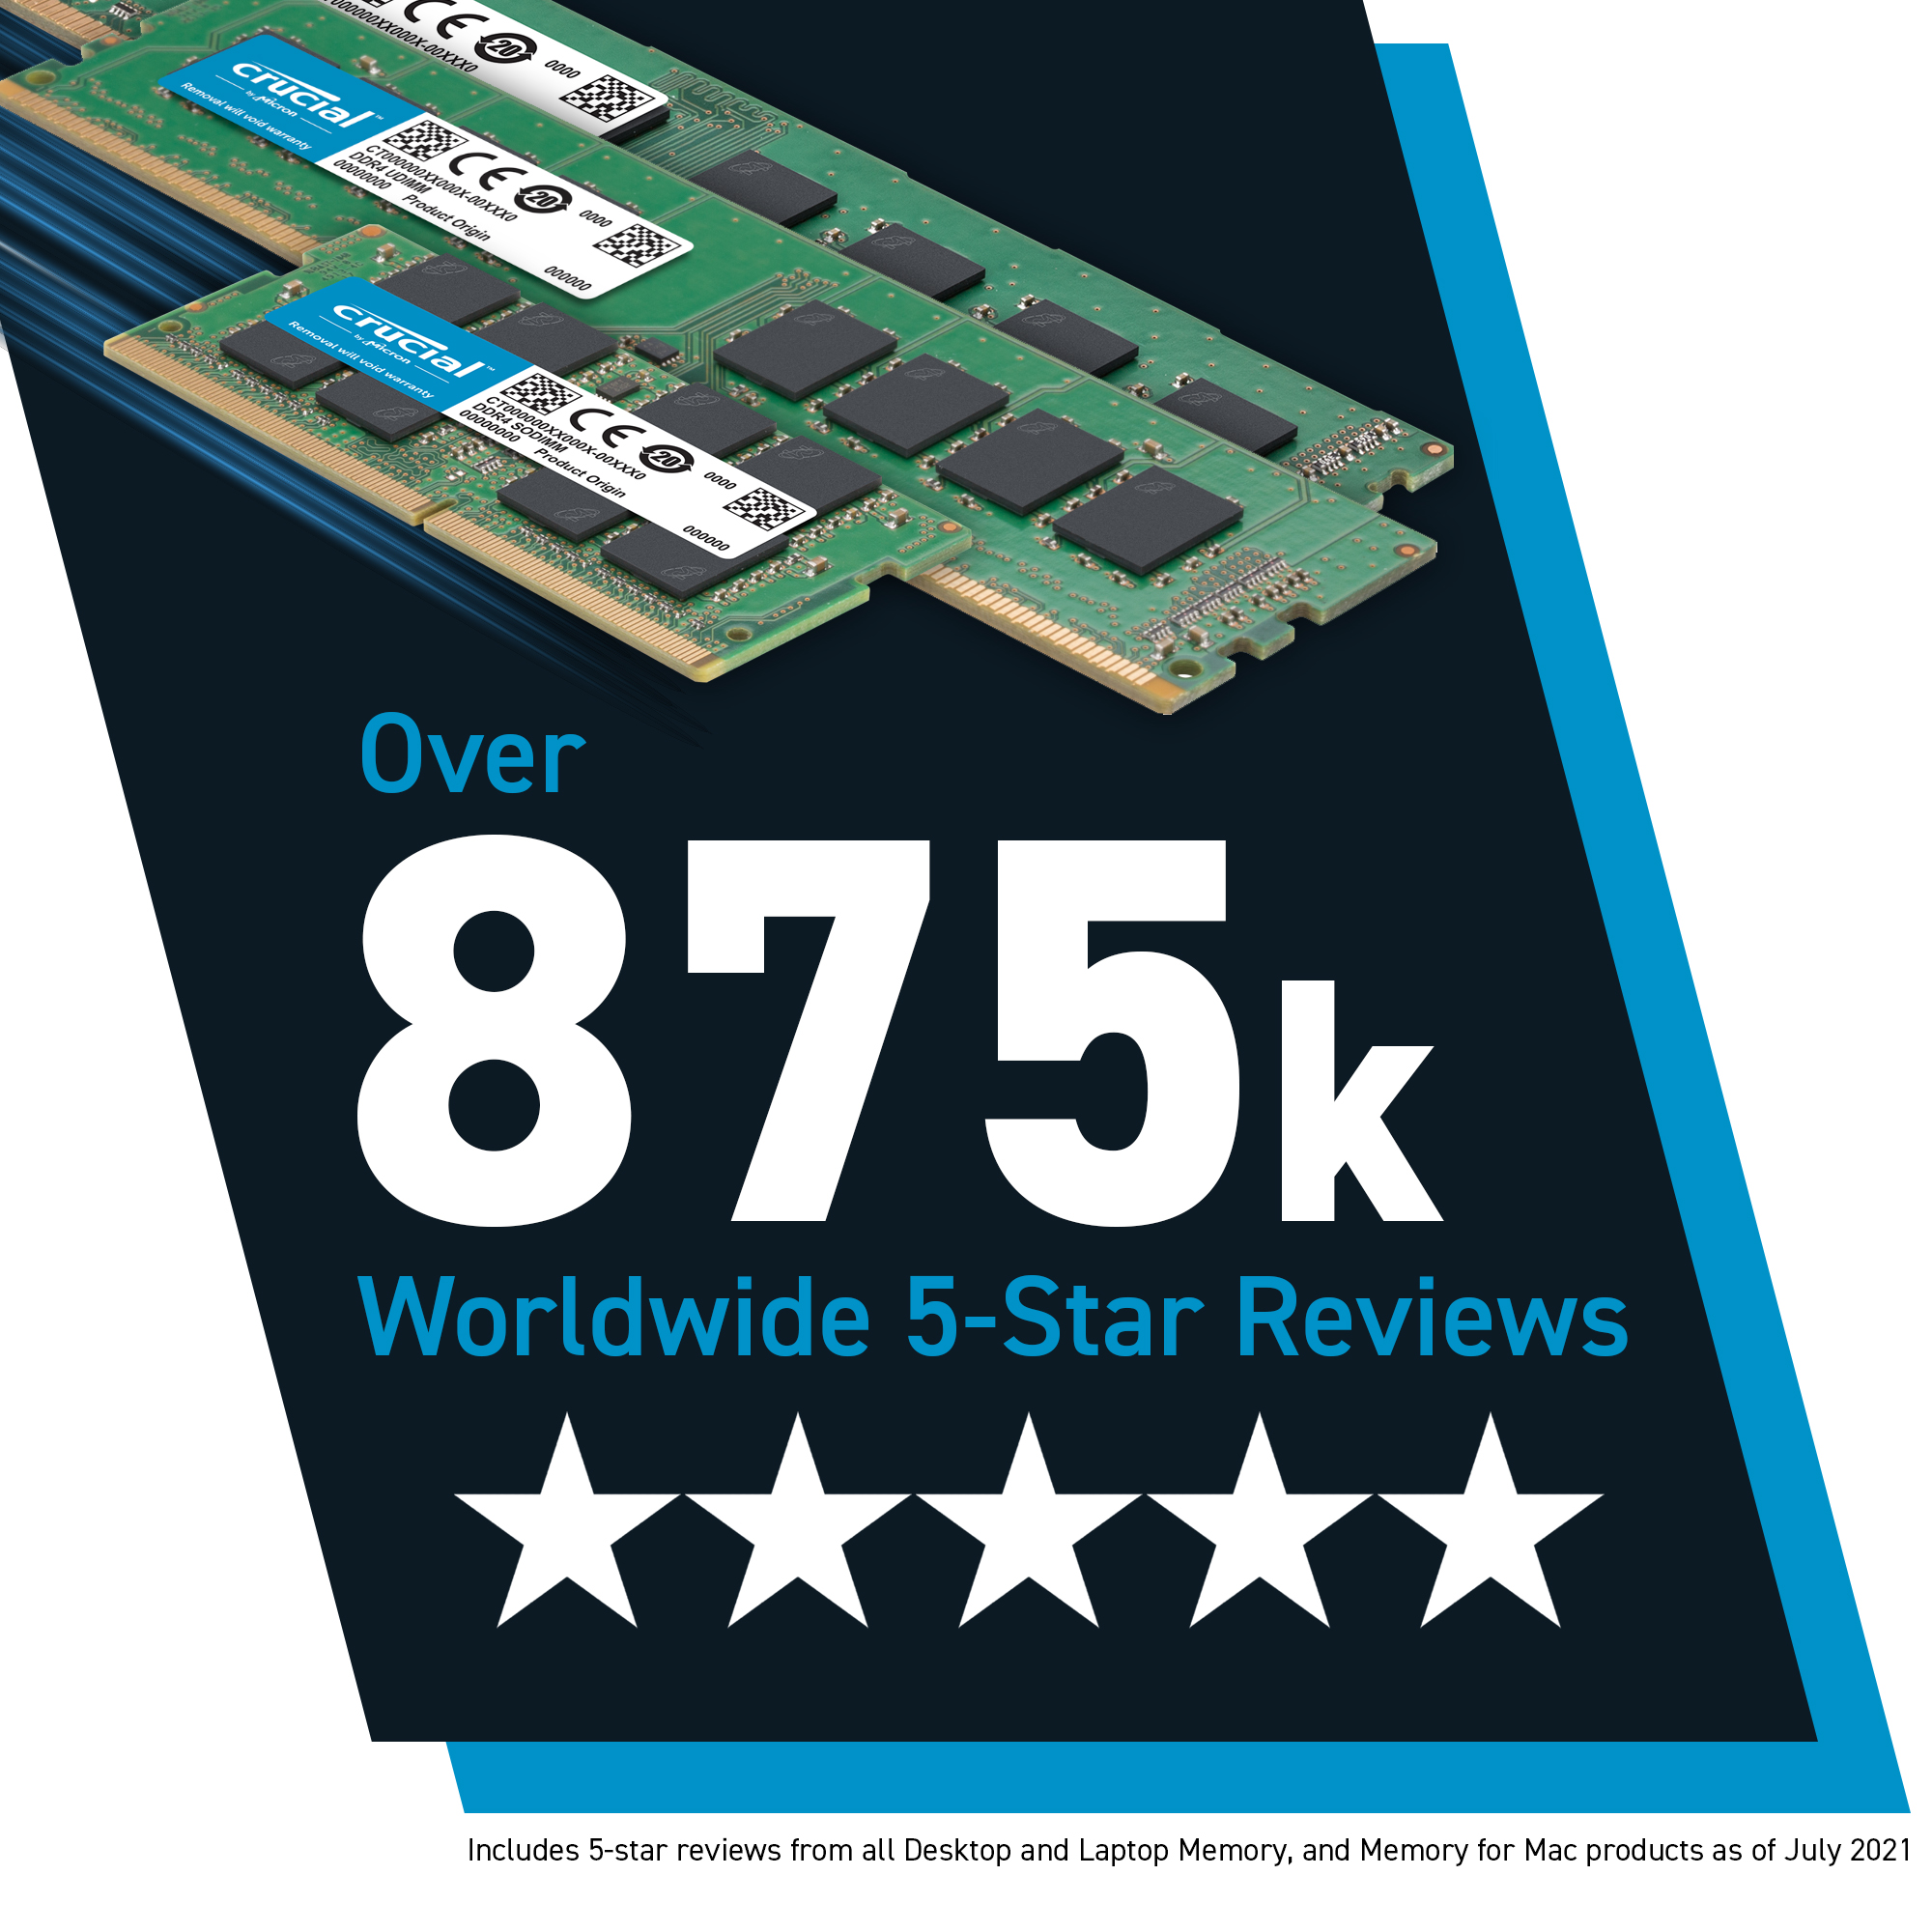 Crucial 32GB DDR4-2666 SODIMM Memory for Mac- view 3